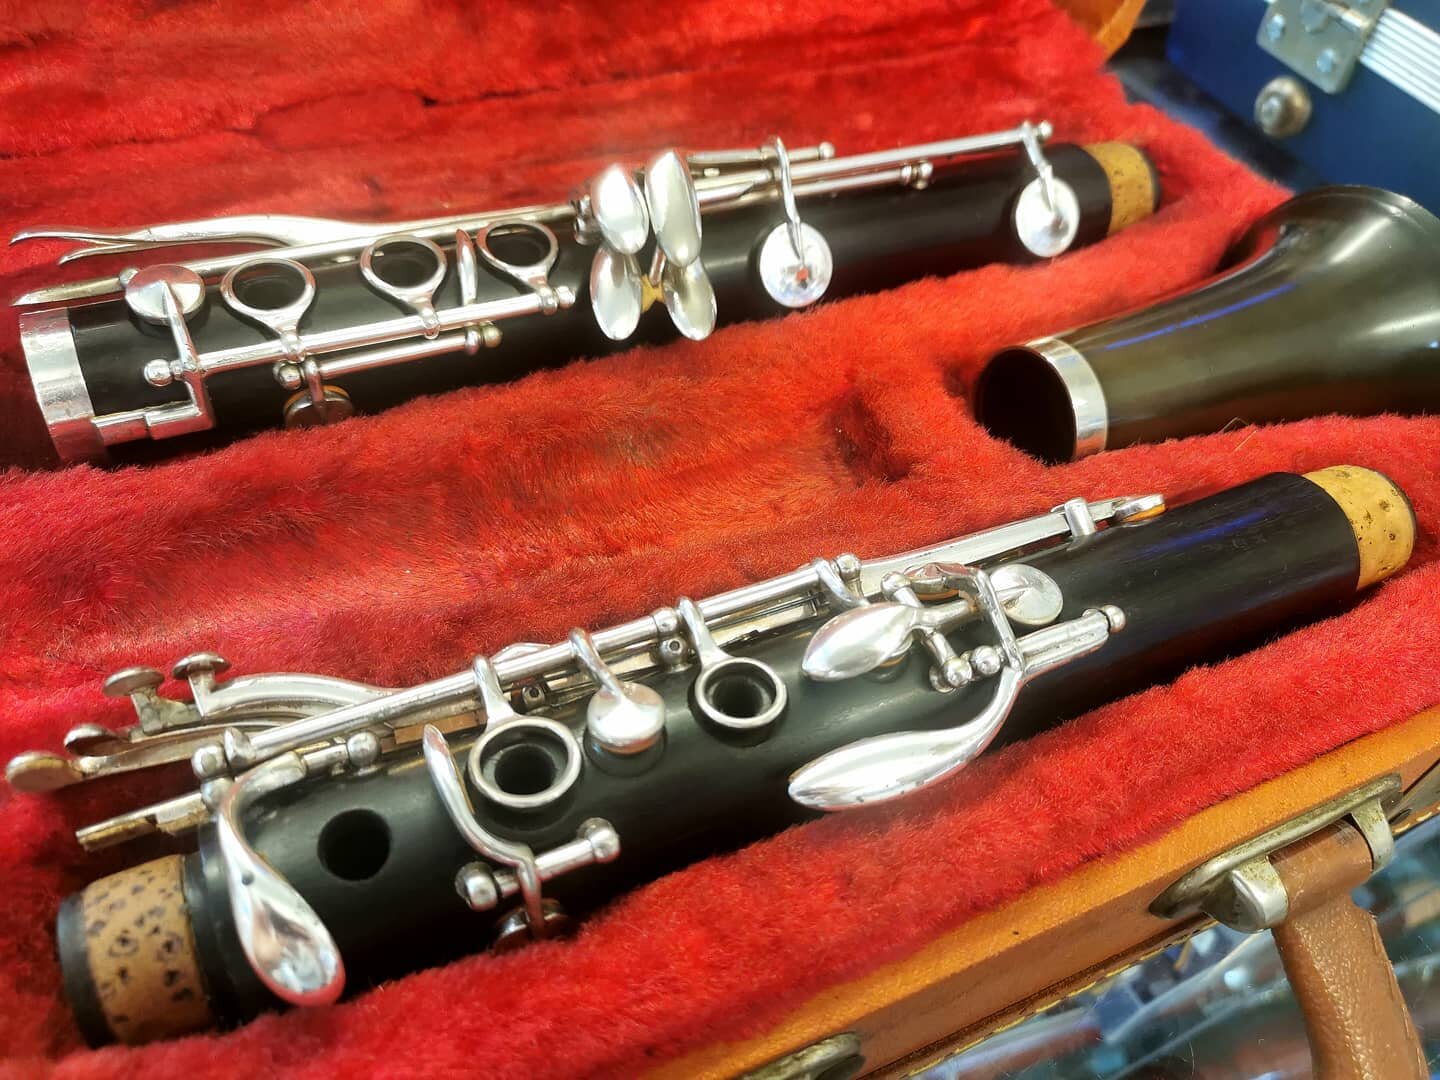 We've recently acquired a @booseyandhawkes 1010 Bb clarinet. Unfortunately however, it has seen better days. SO, over the coming weeks, we're going to be giving it the tlc it needs and restoring it back to its former glory. Stay tuned to follow this 